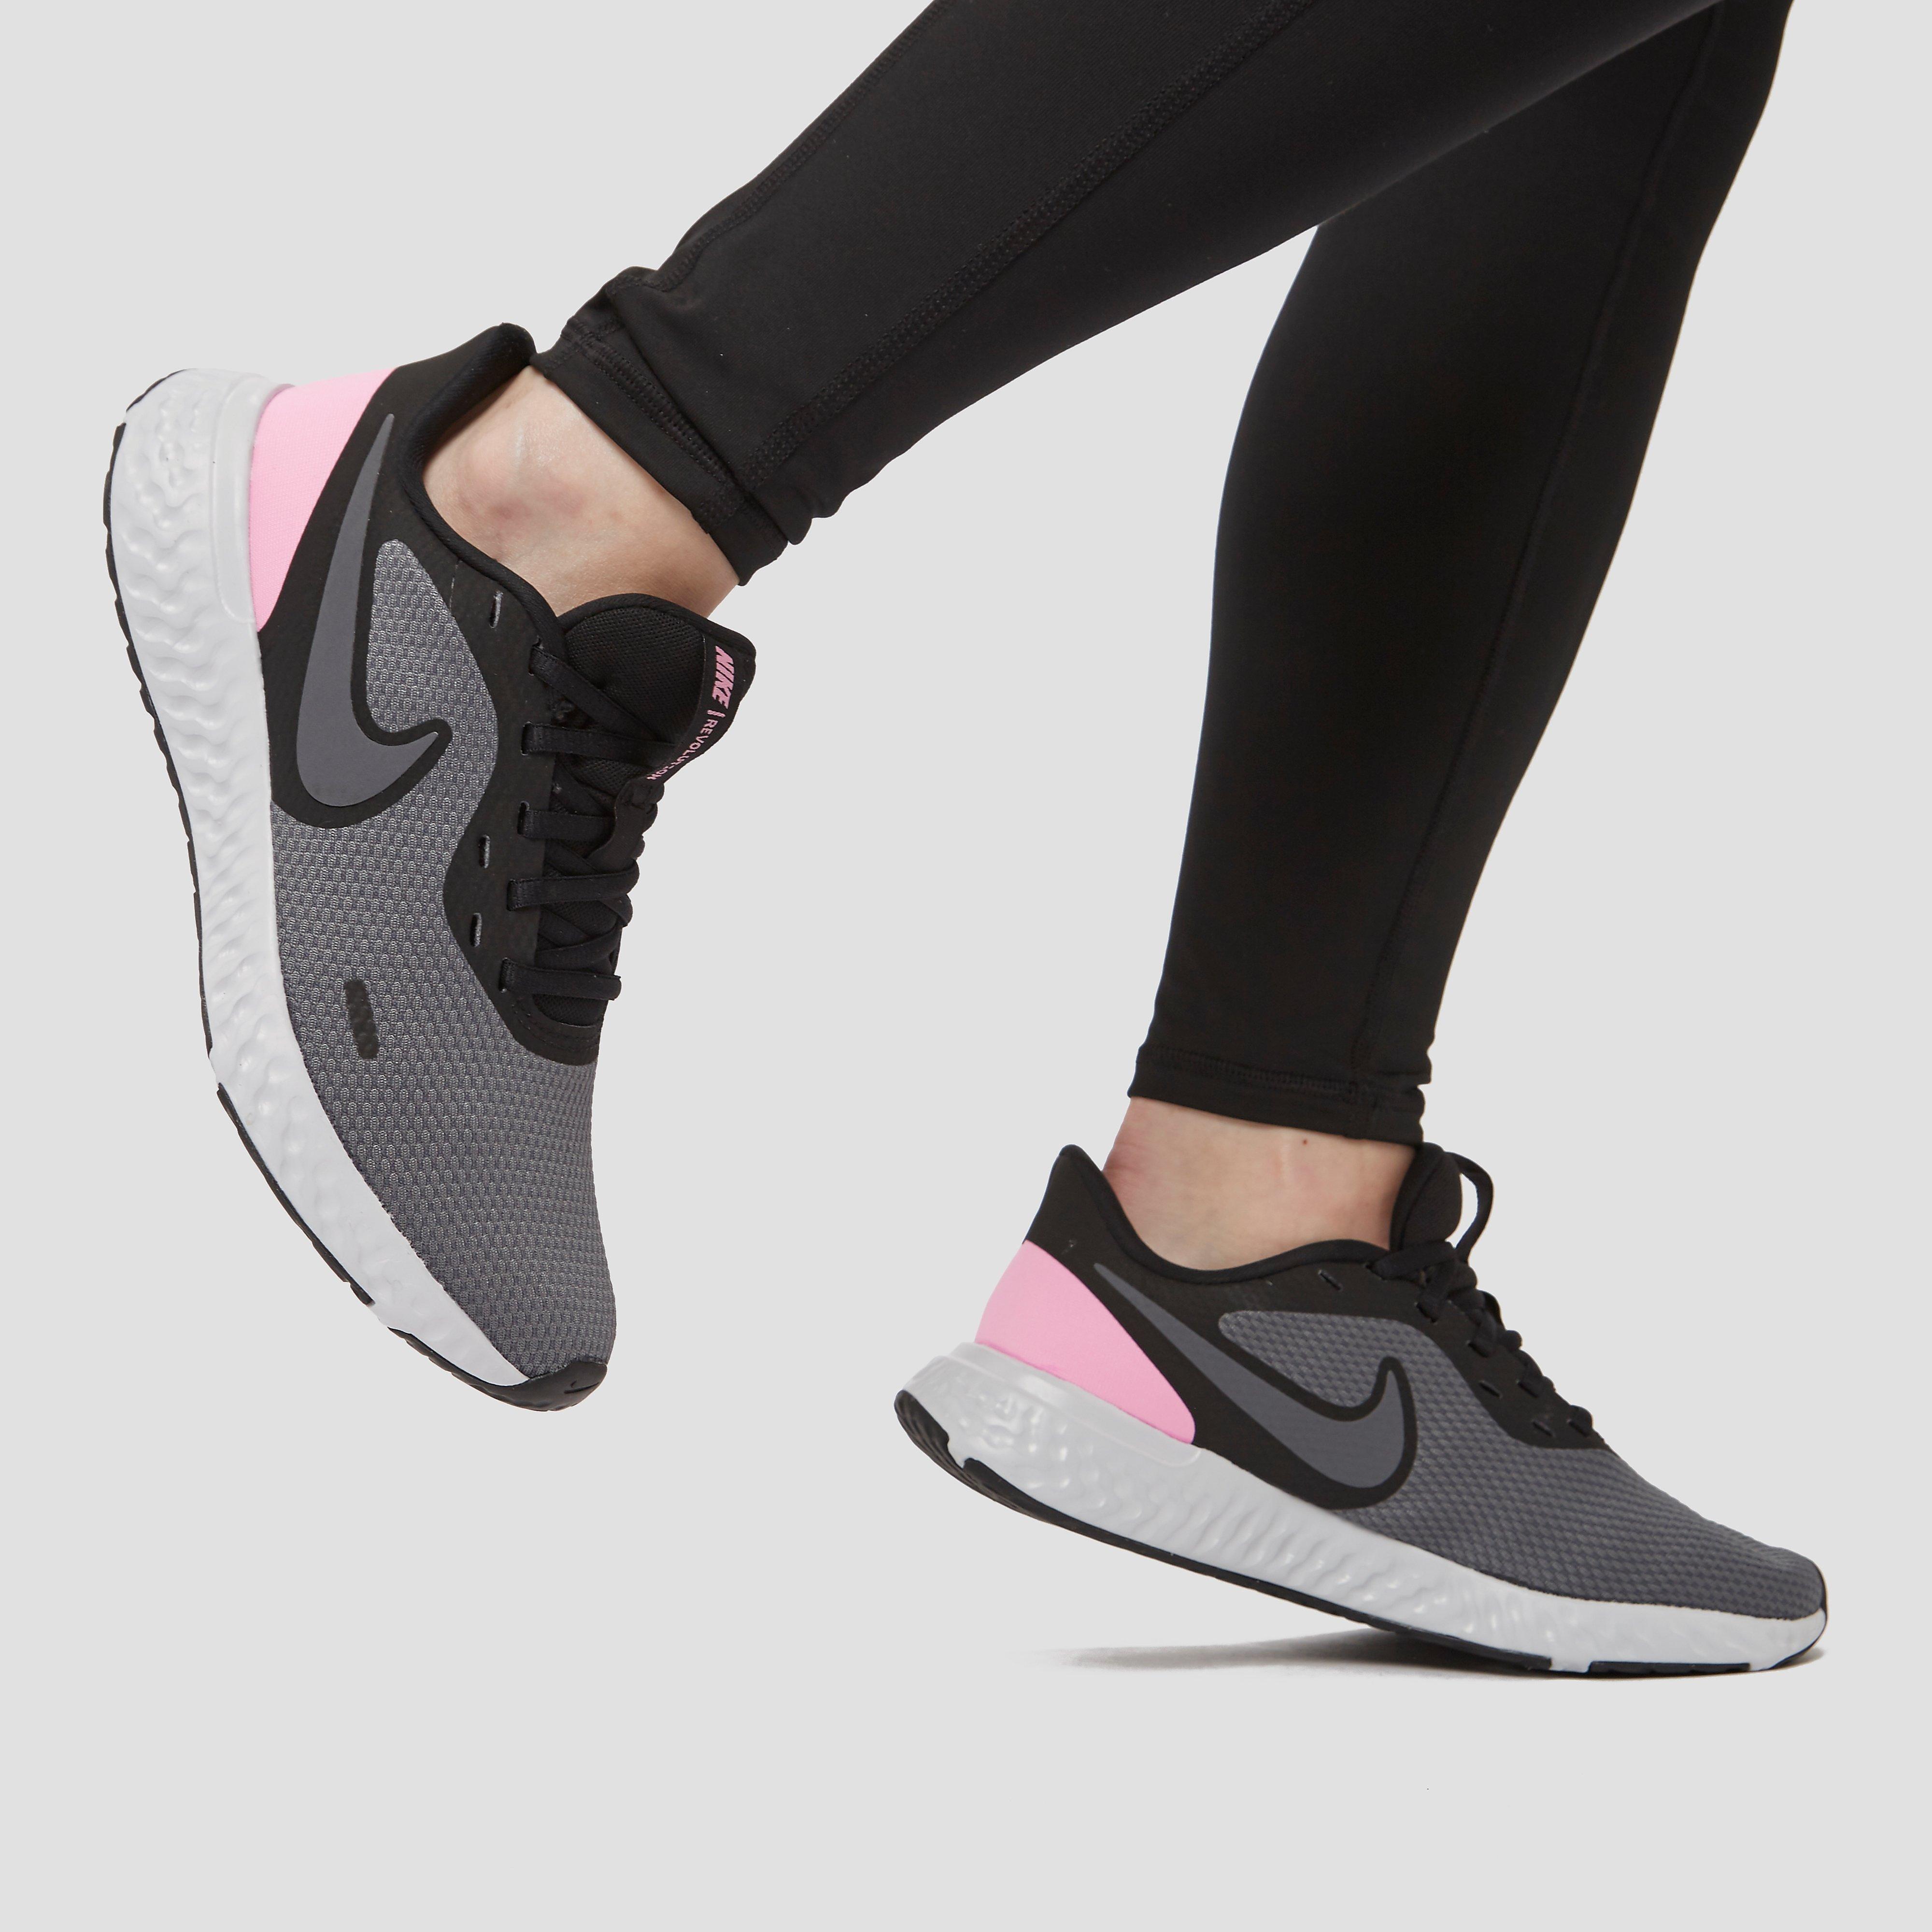 scapino nikes cheap online